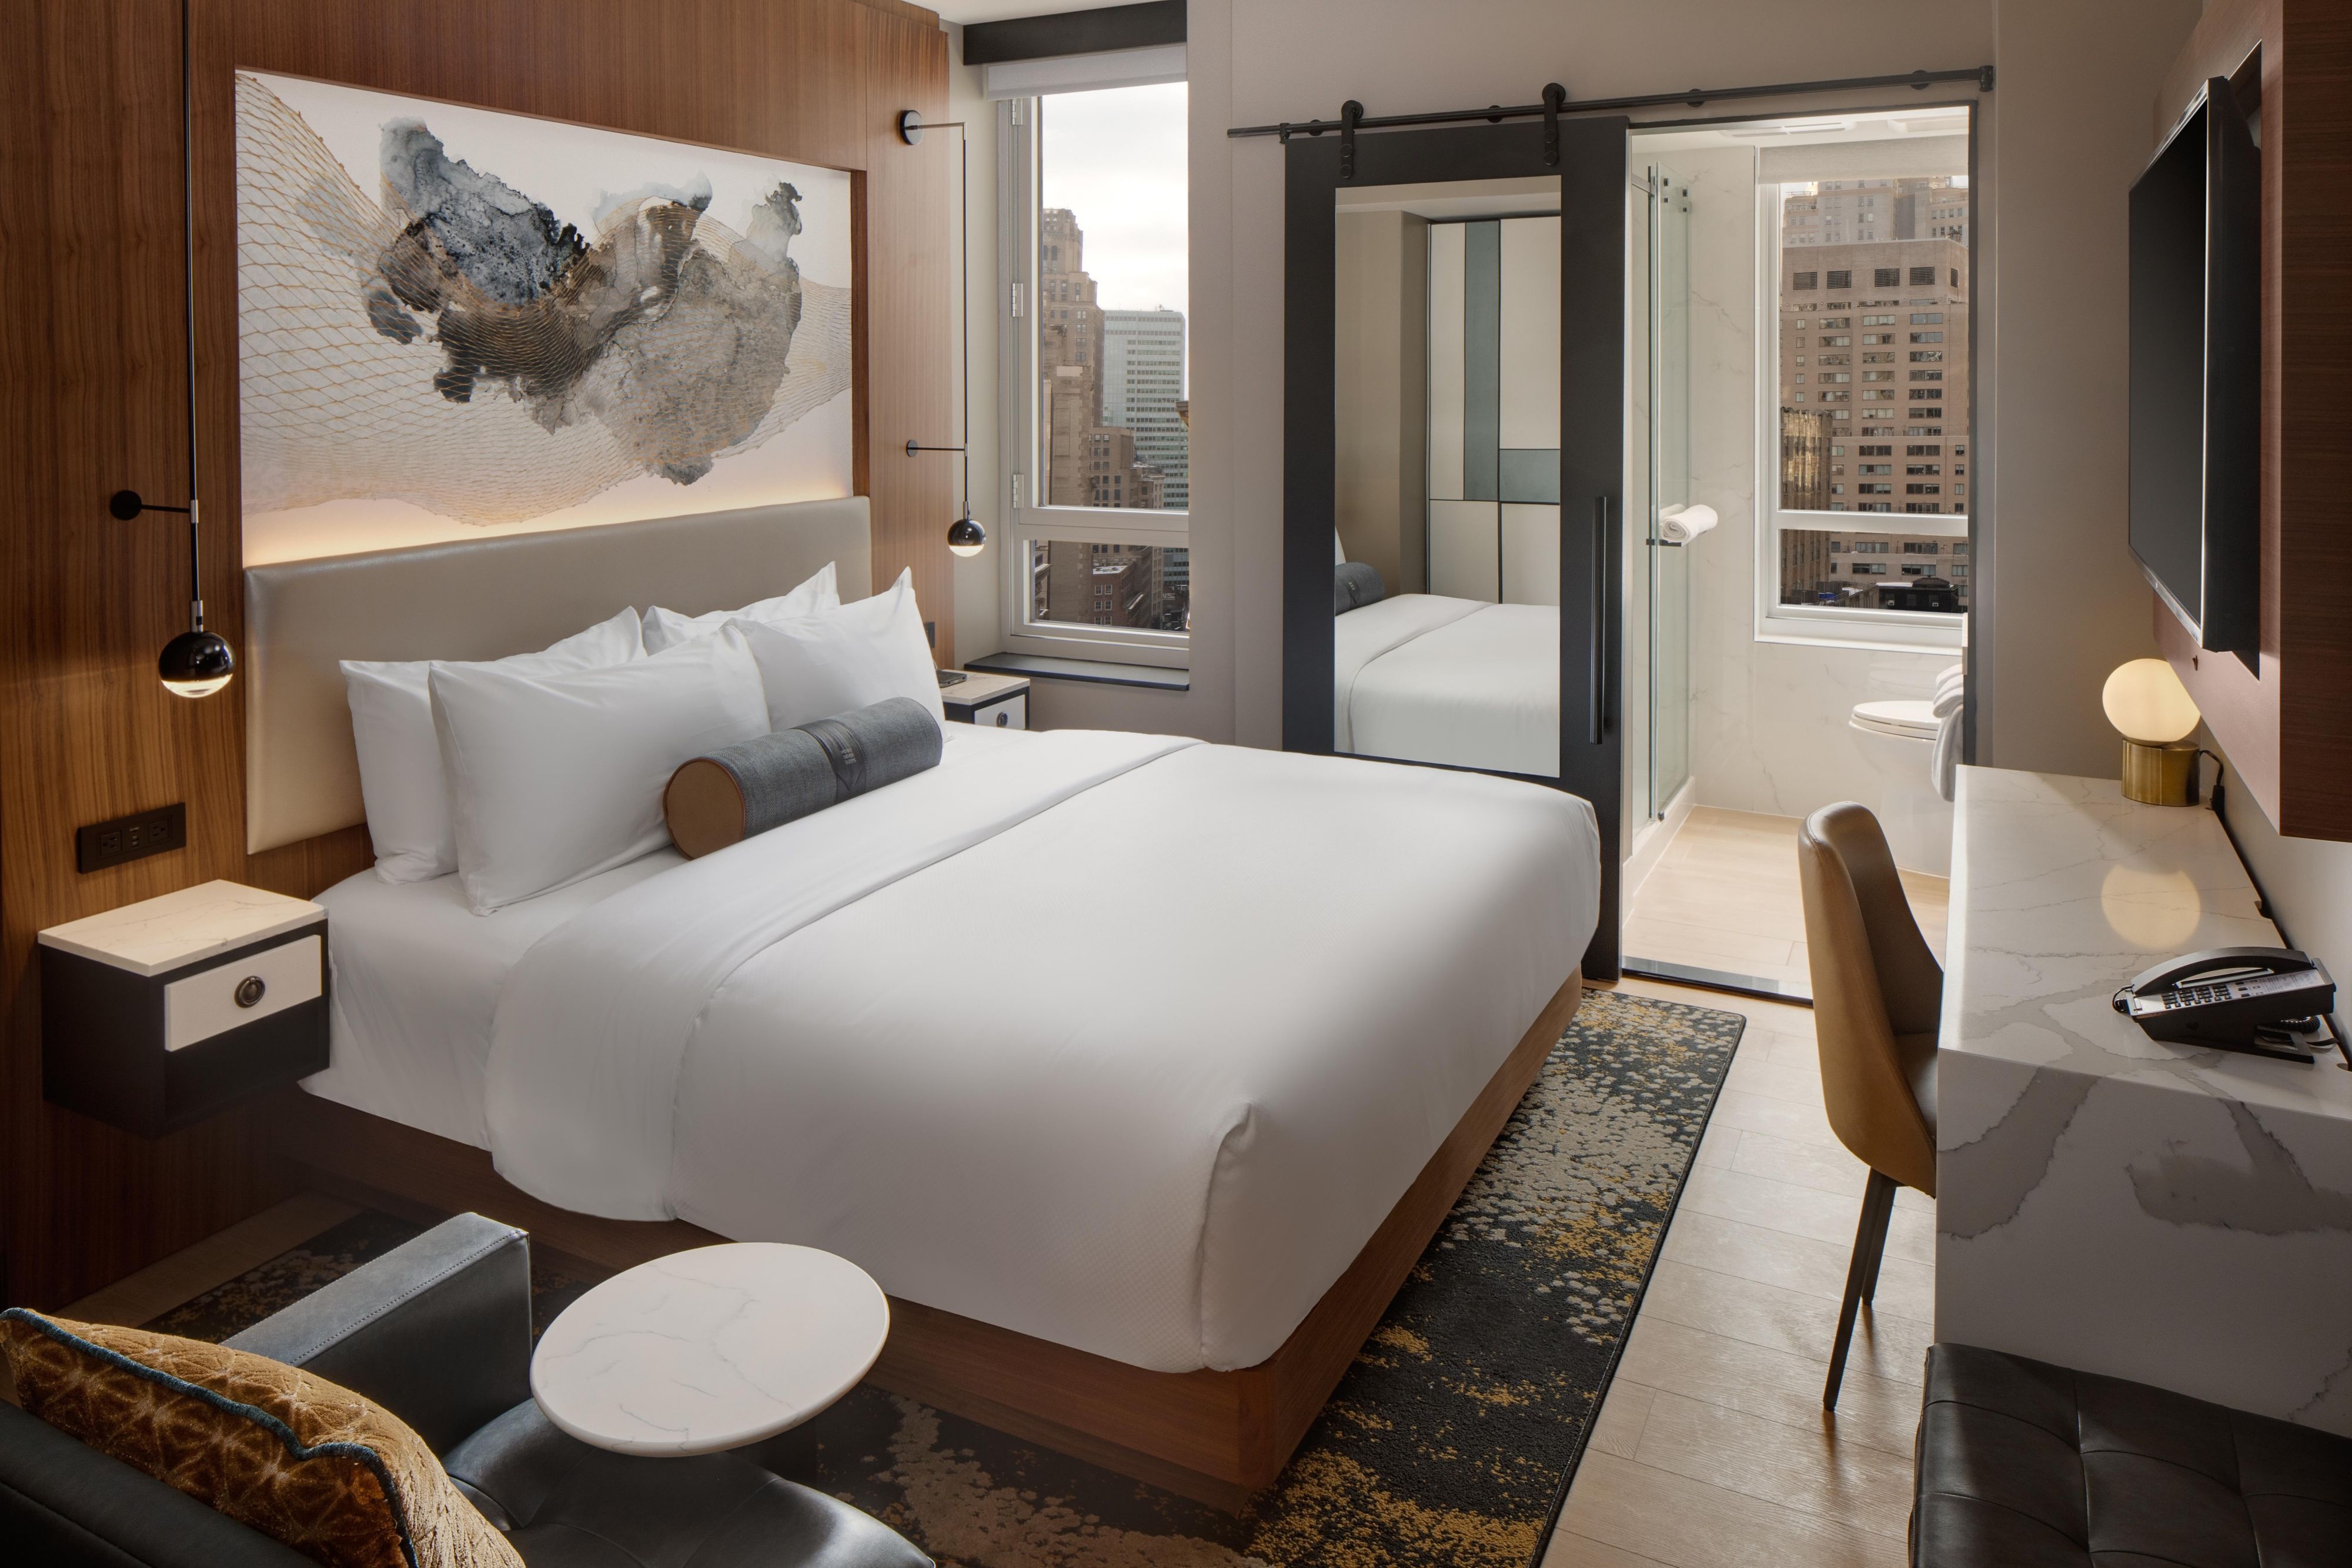 Our 127 boutique guest rooms offer a respite from the pace of the Financial District. Designed as an ode to our neighborhood’s historic days, our rooms offer a modern retreat for work and rest. Enjoy rooms with spa-like bathrooms and upgrade to guestrooms with balconies with views of downtown NYC.